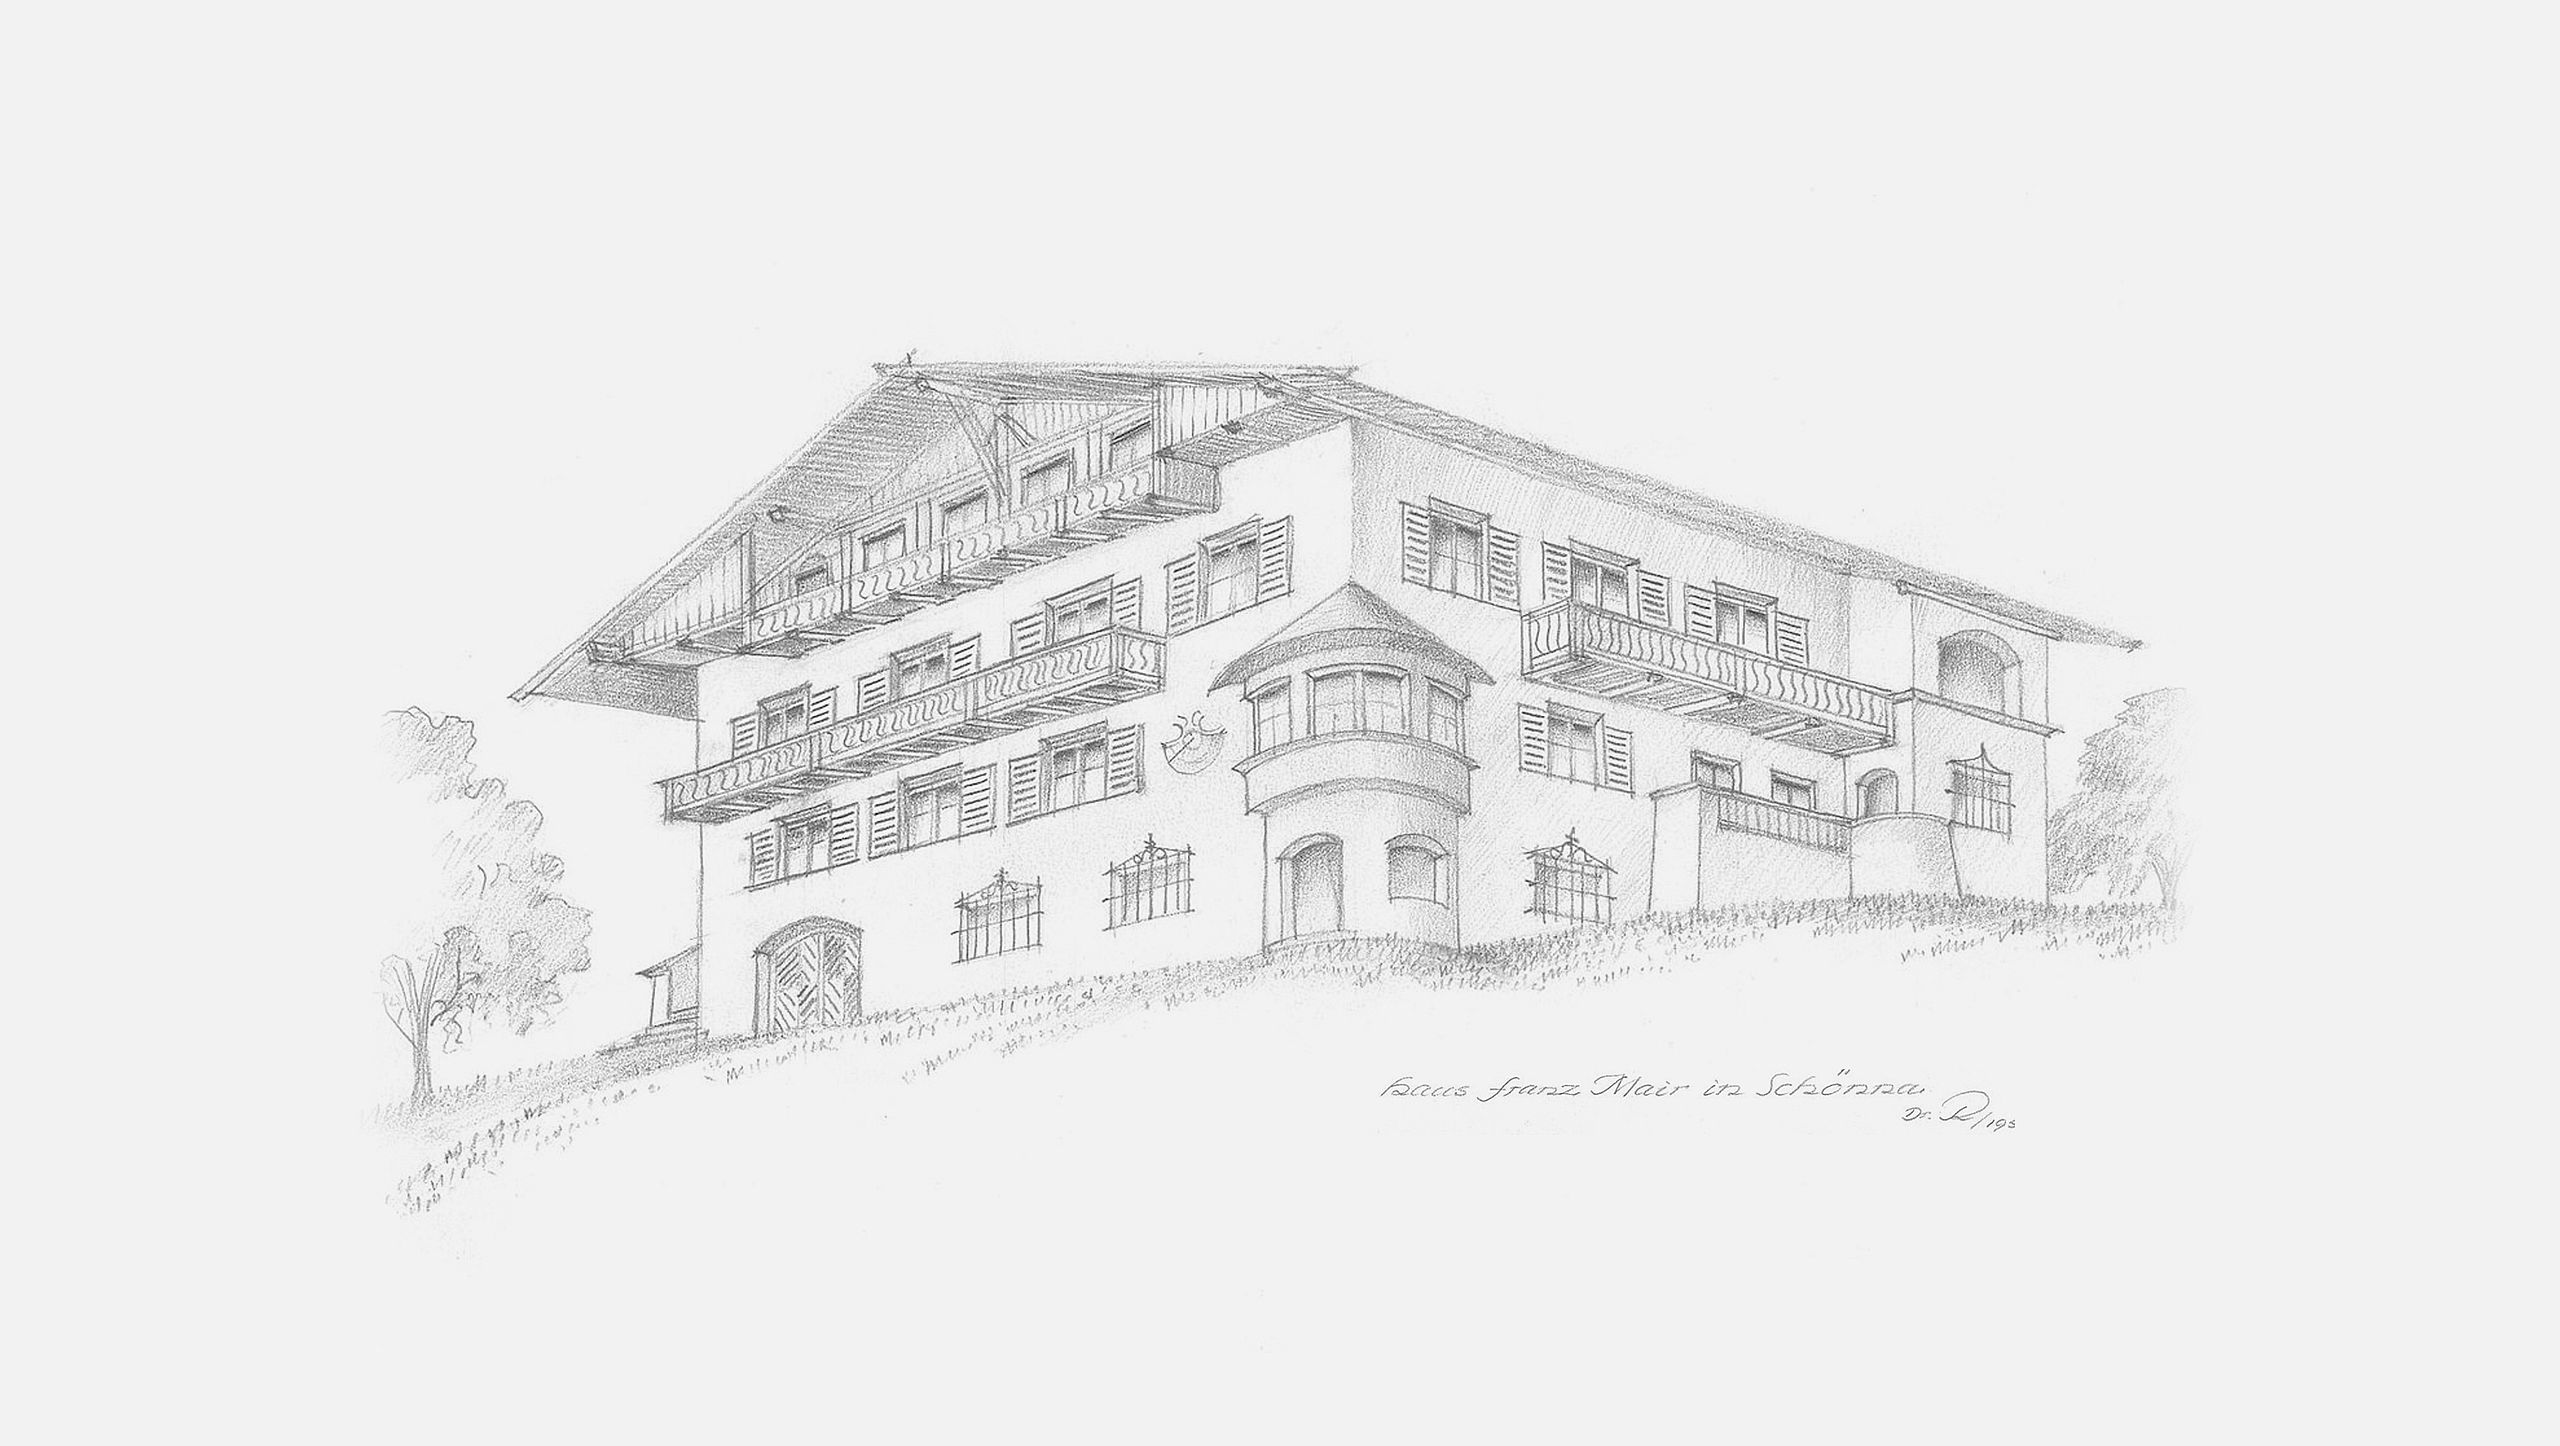 Drawing of the Wellness Hotel Schenna